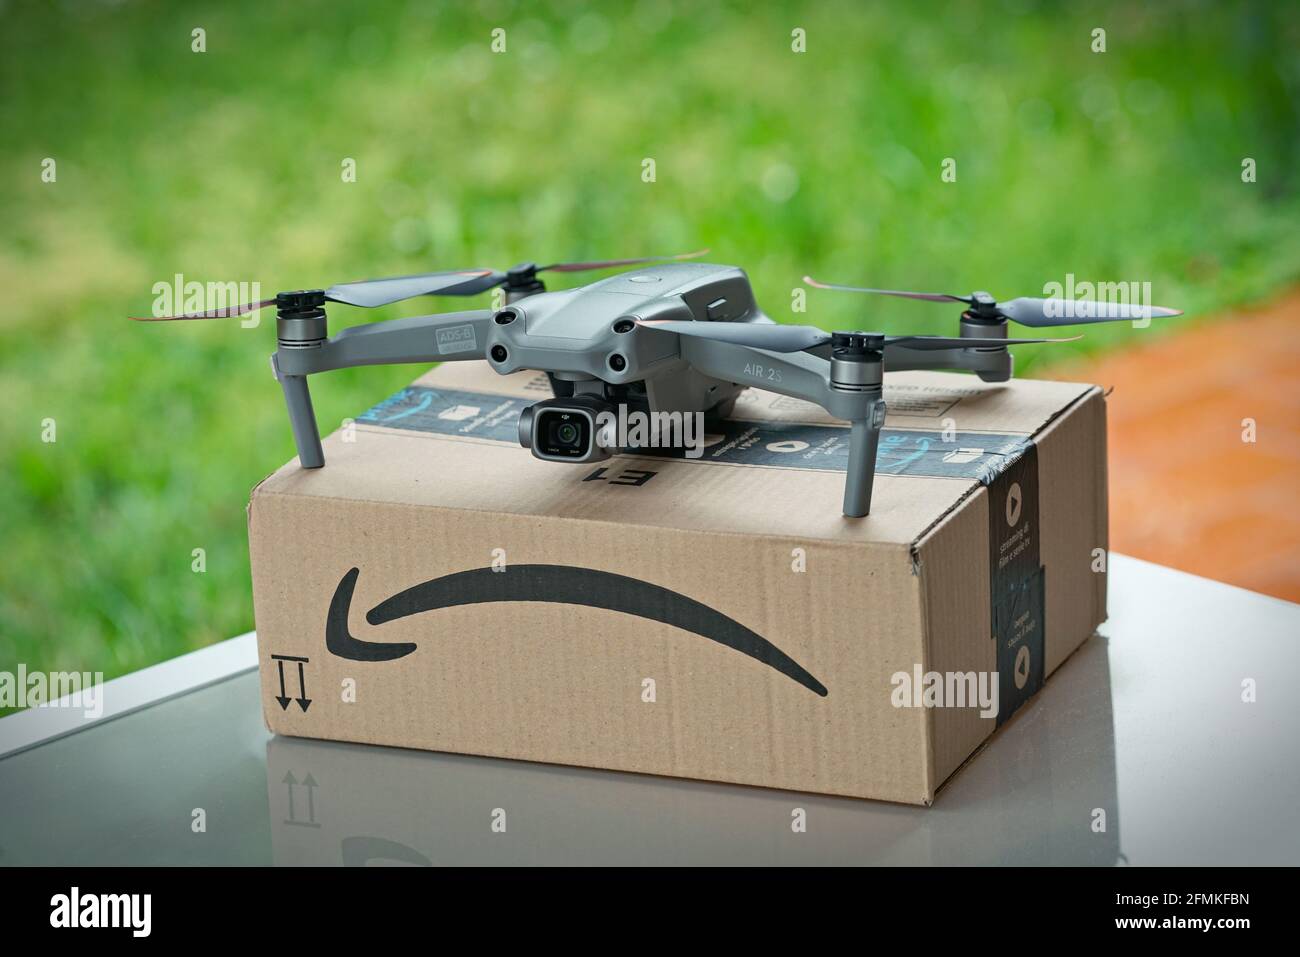 Selective focus on drone delivering parcel with amazon logo on cardboard. Milan, Italy - May 2021 Stock Photo